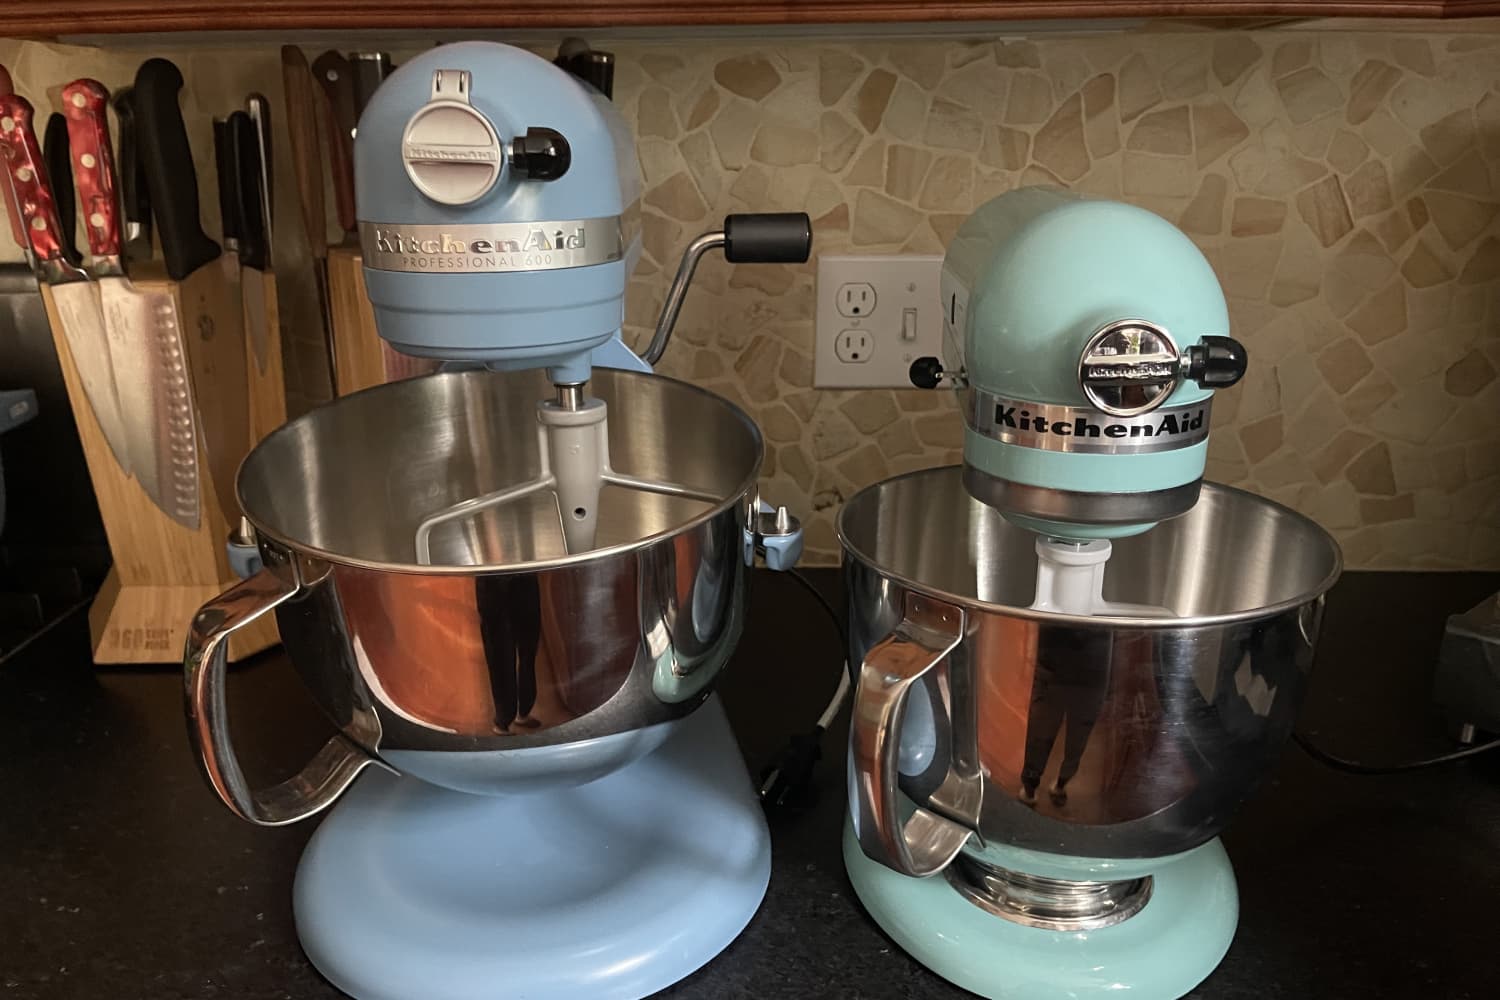 KitchenAid mixer attachment will not spin? The mixer works fine